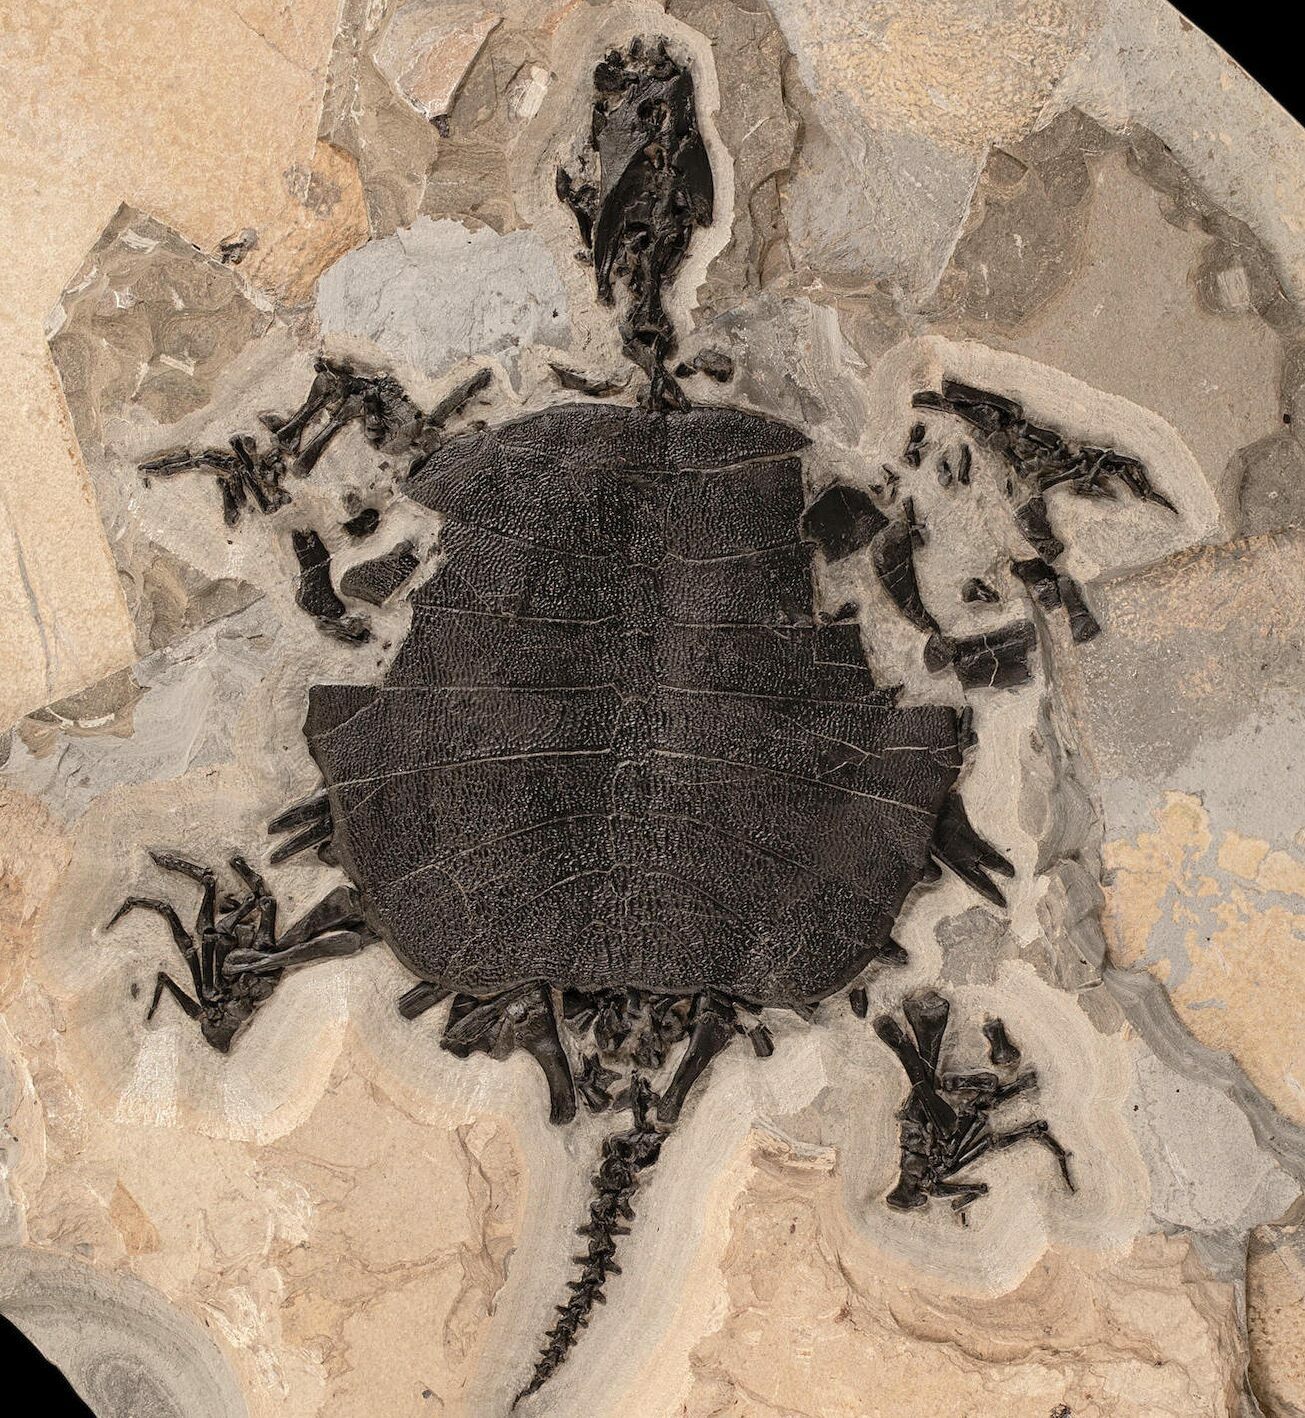 Incredible, 30" Fossil Turtle (Apalone) - Green River Formation (#122208) For Sale - FossilEra.com